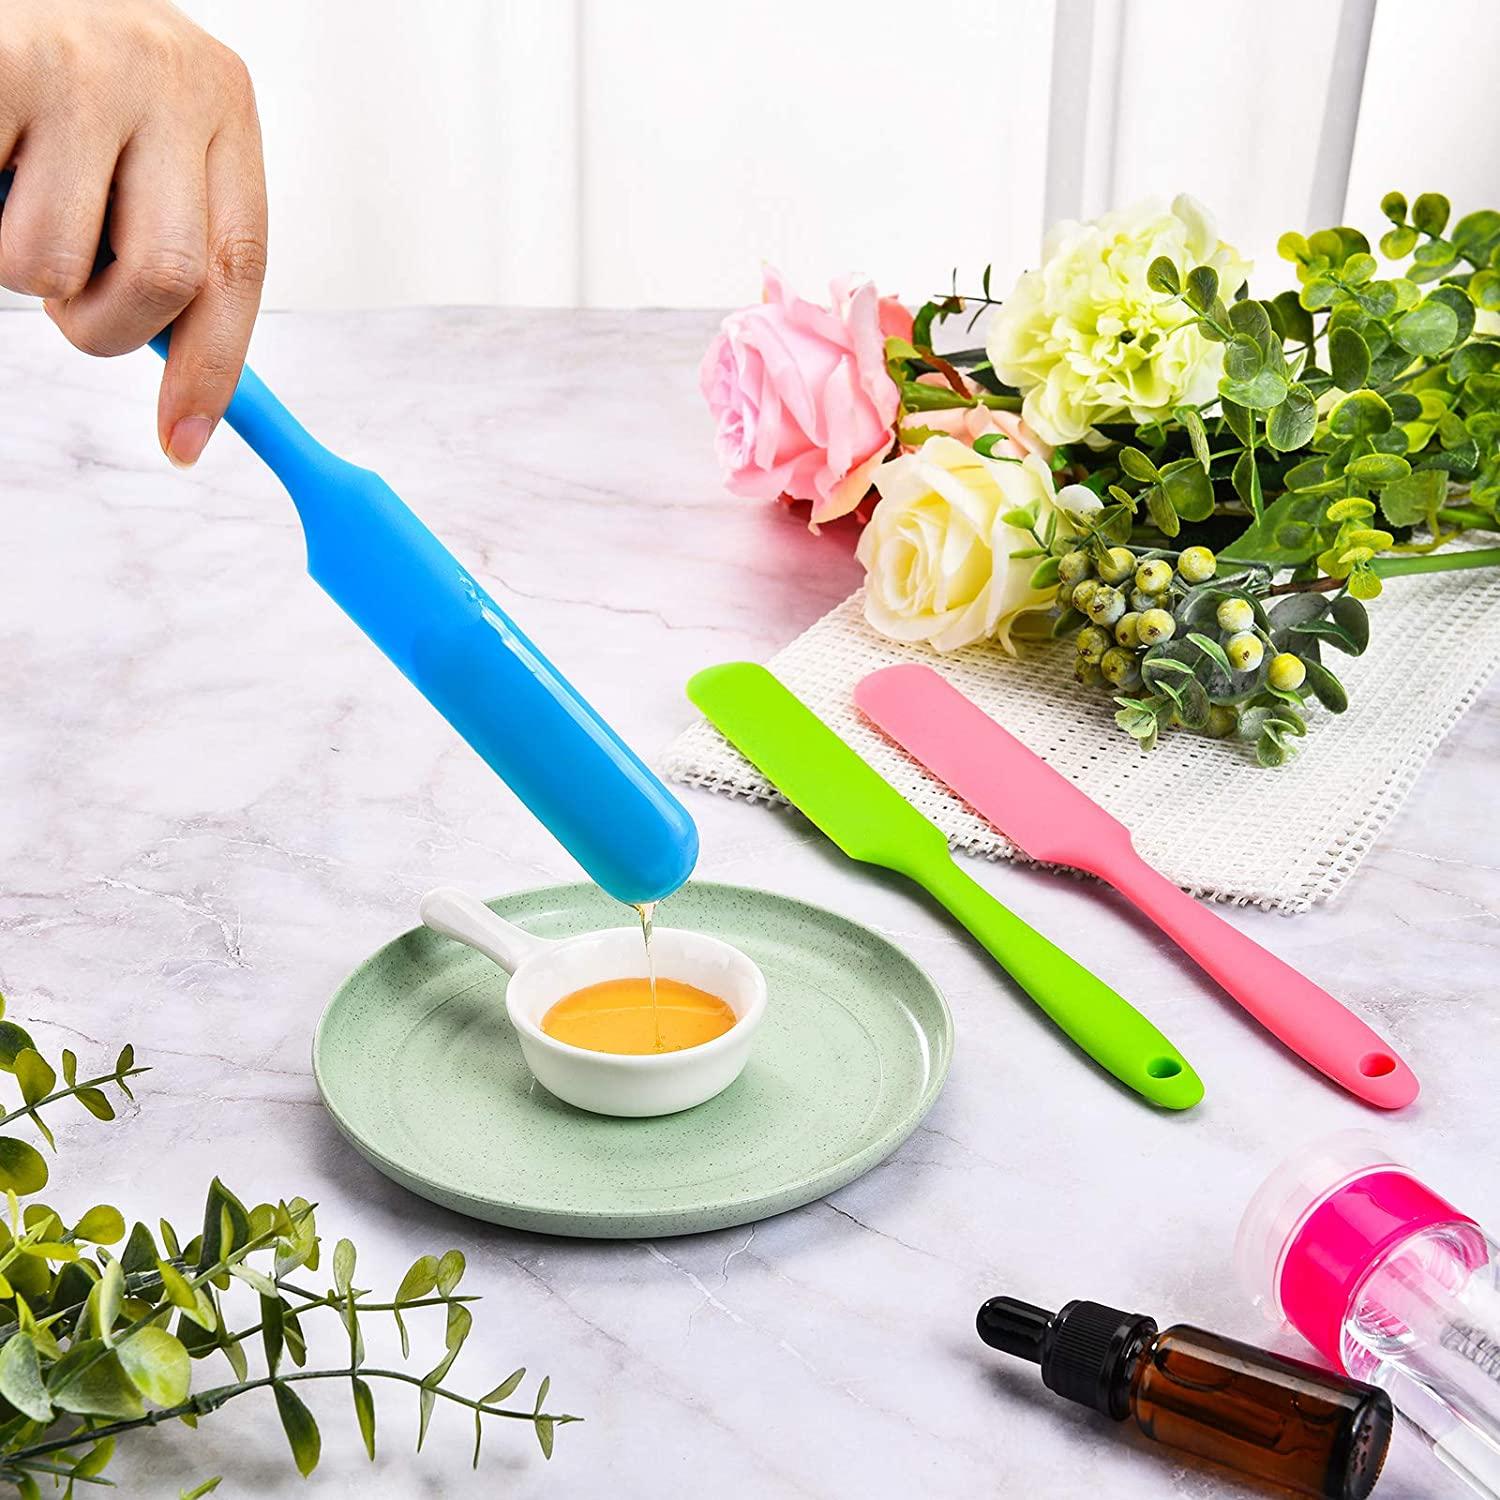 FRCOLOR 3pcs Silicone hair removal stick wax stick for hair wax spatula  Silicone Wax Stick Hair Removal wax sticks applicator body wax gigi wax non